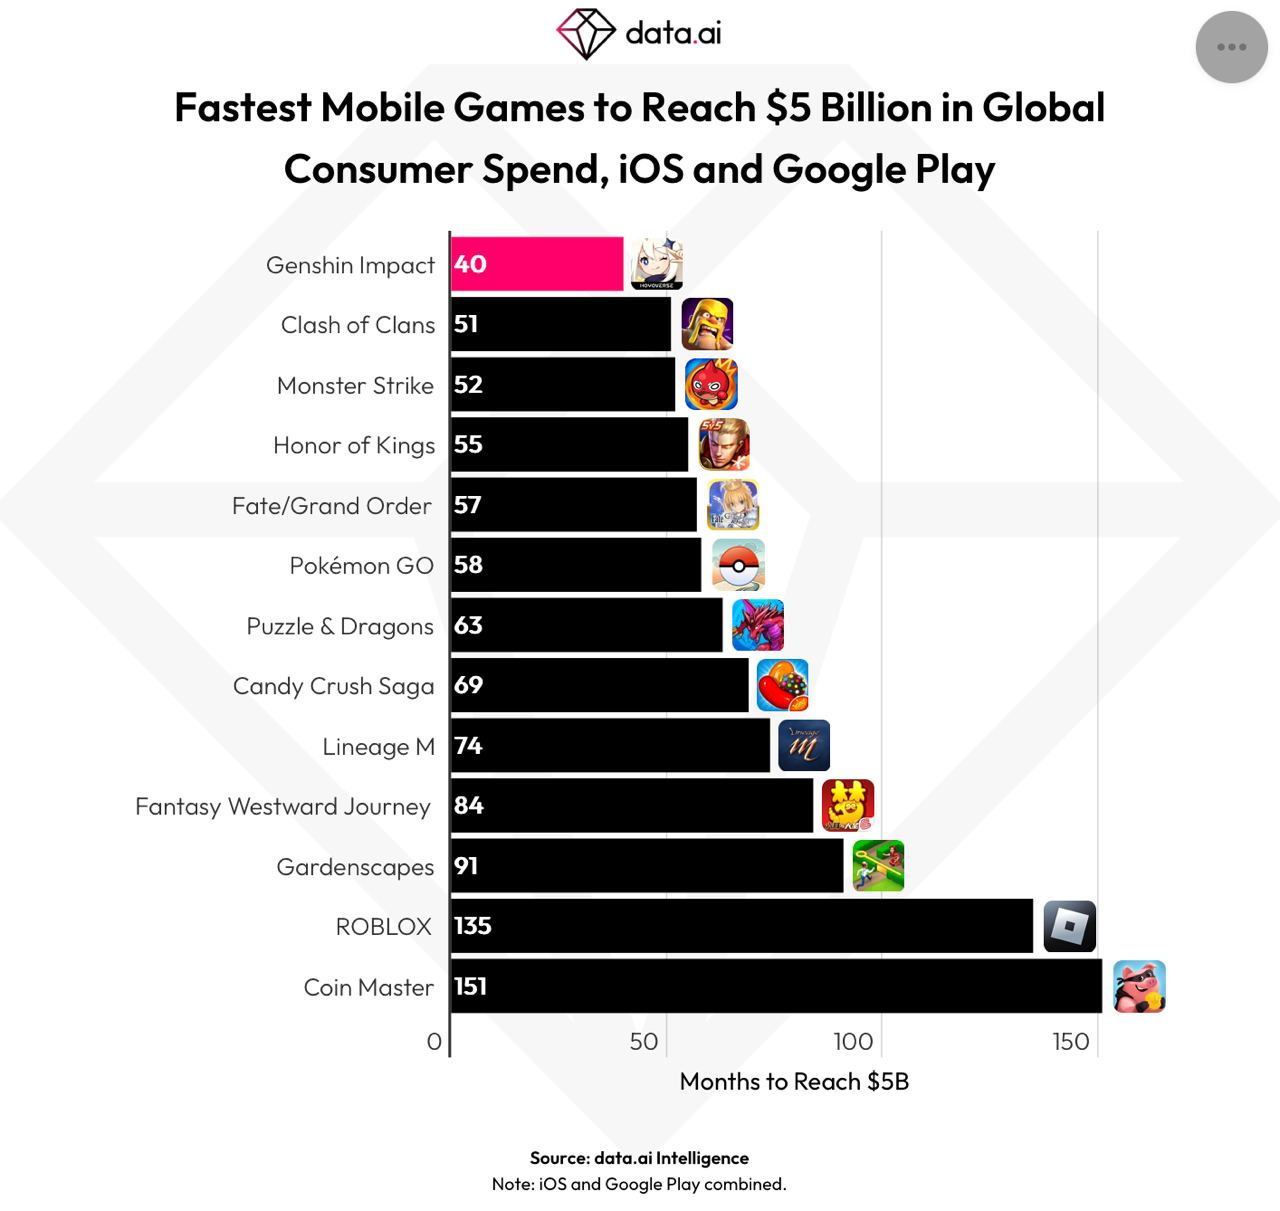 fastest game to earn $5B on mobile devices